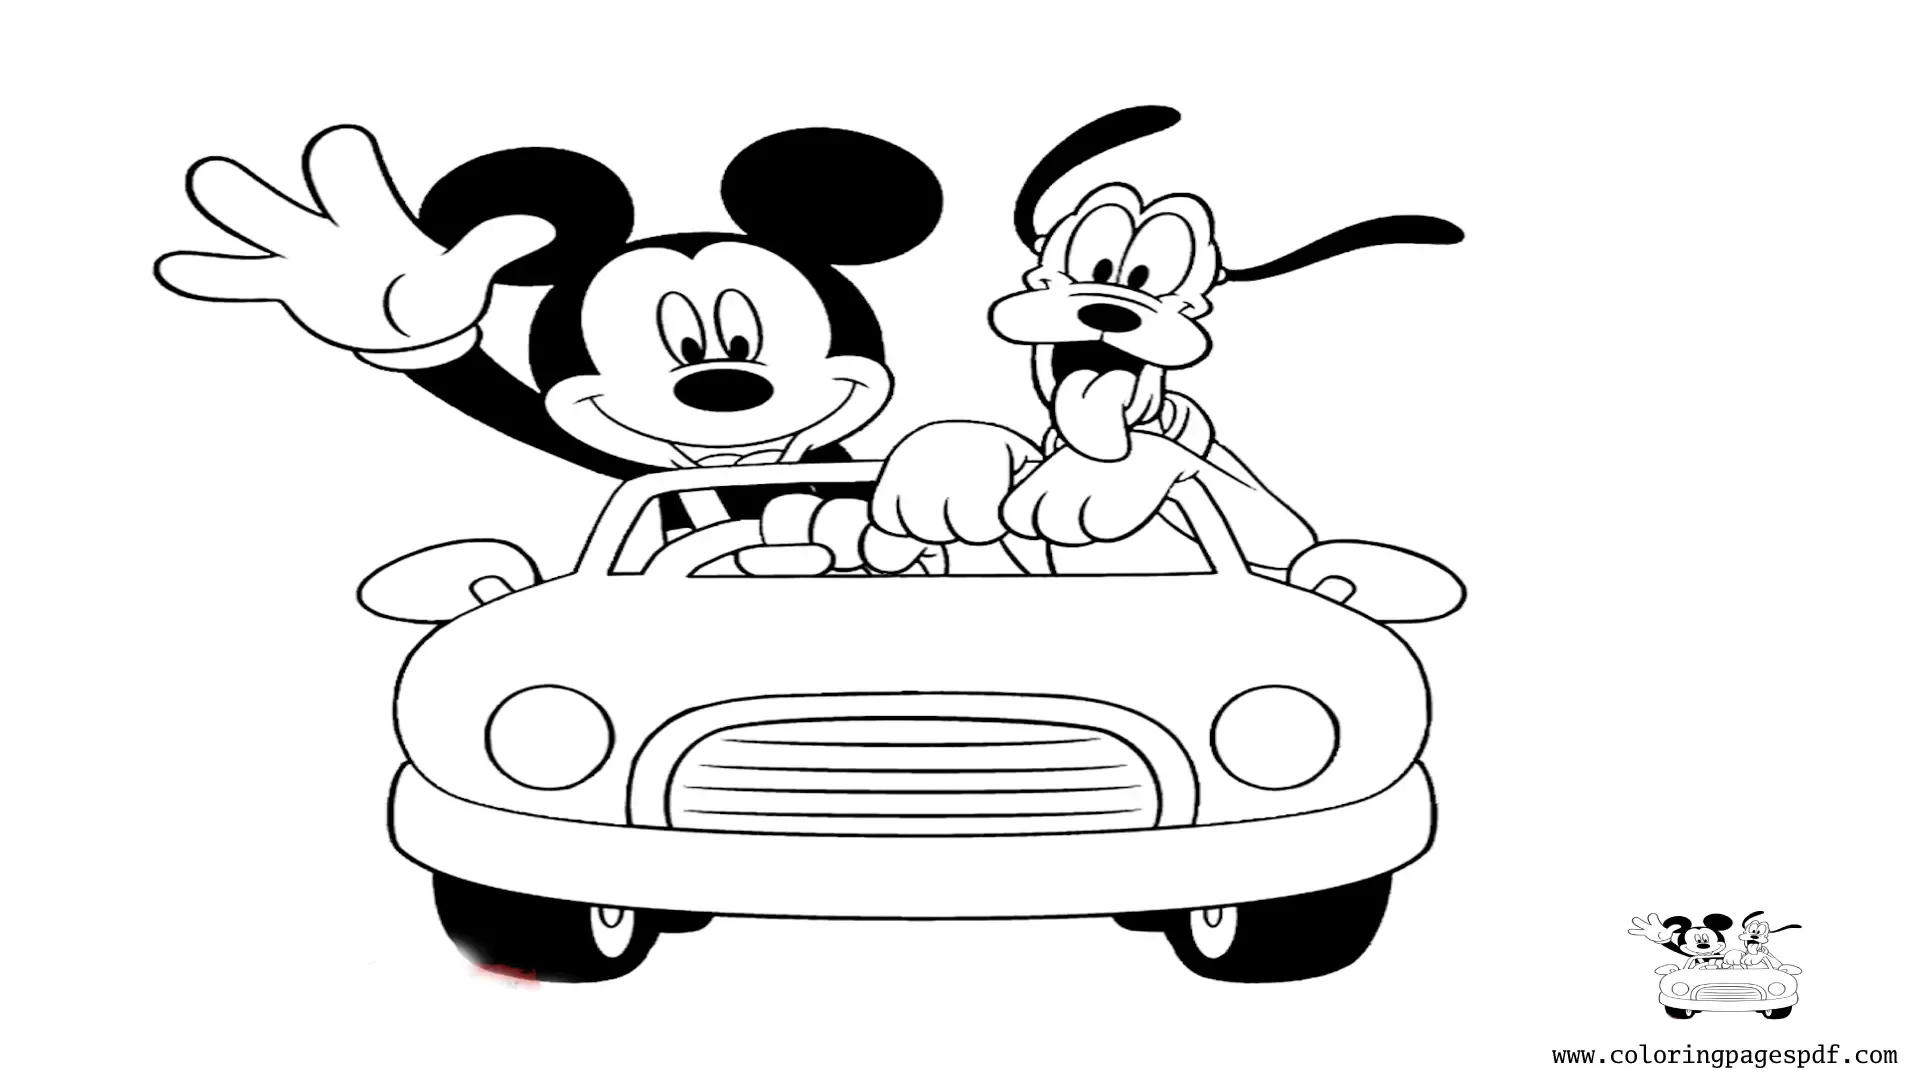 Coloring Page Of Mickey Mouse And Pluto In A Car